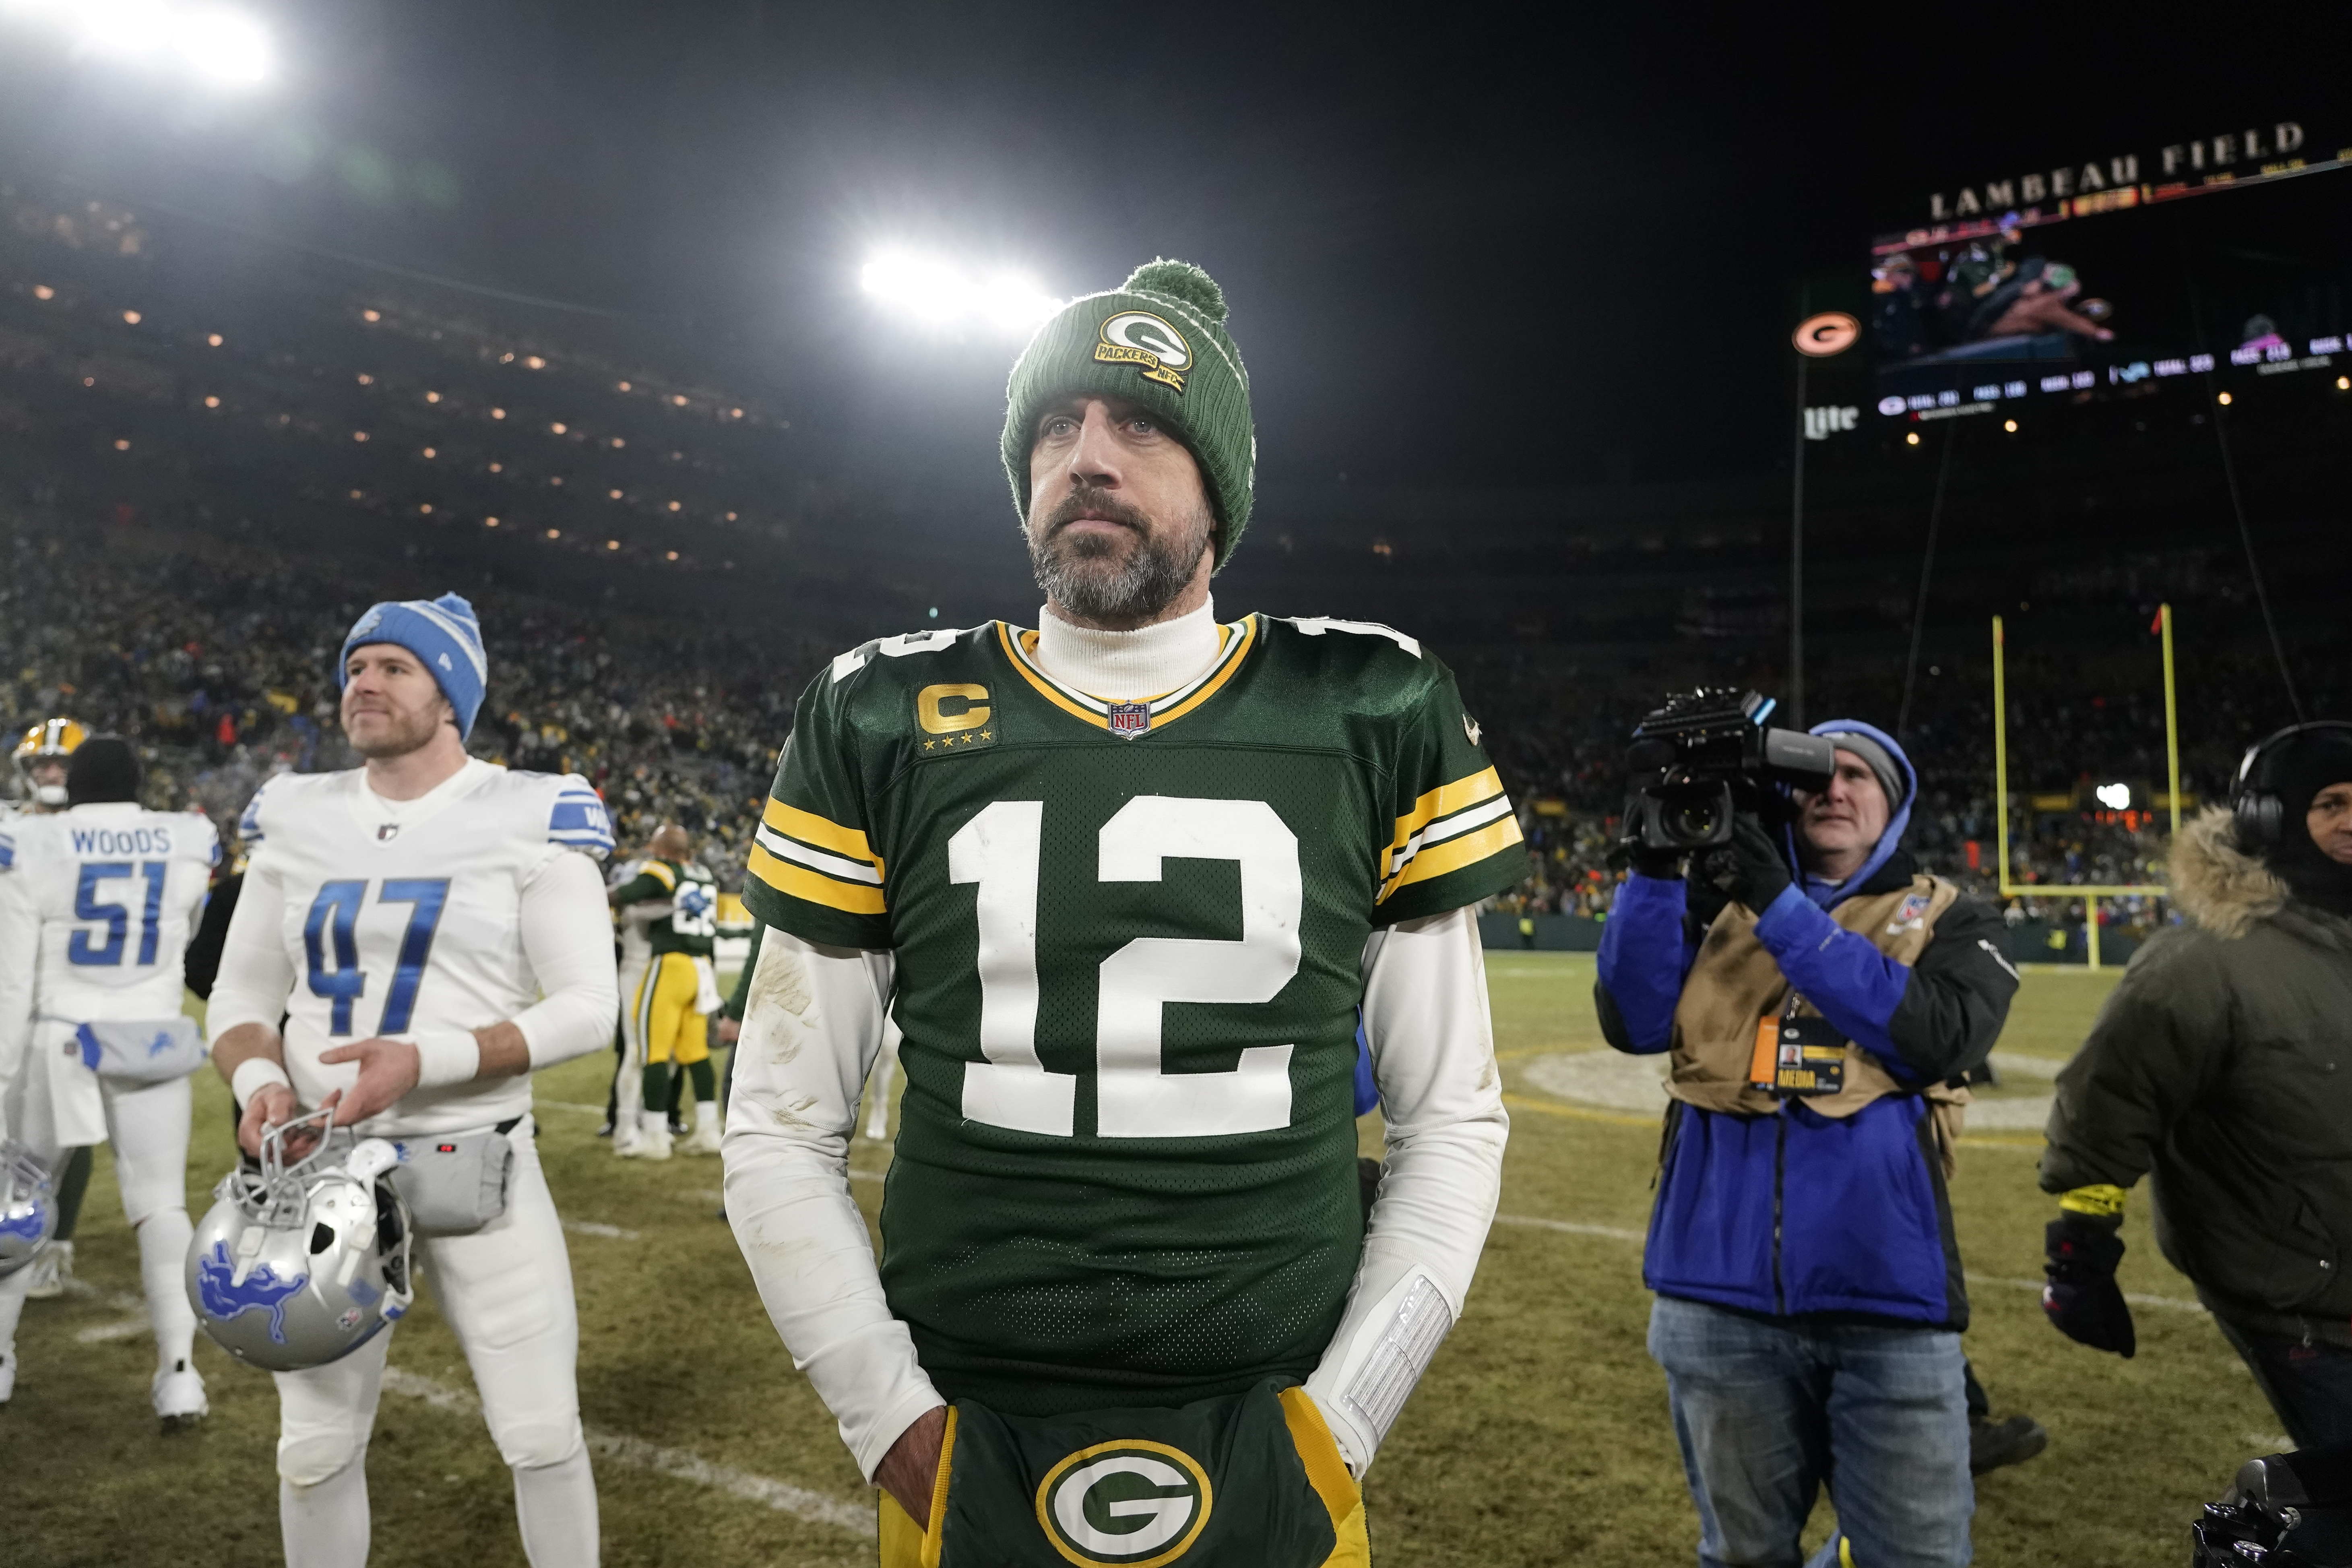 Rodgers says he can play at MVP level in right situation